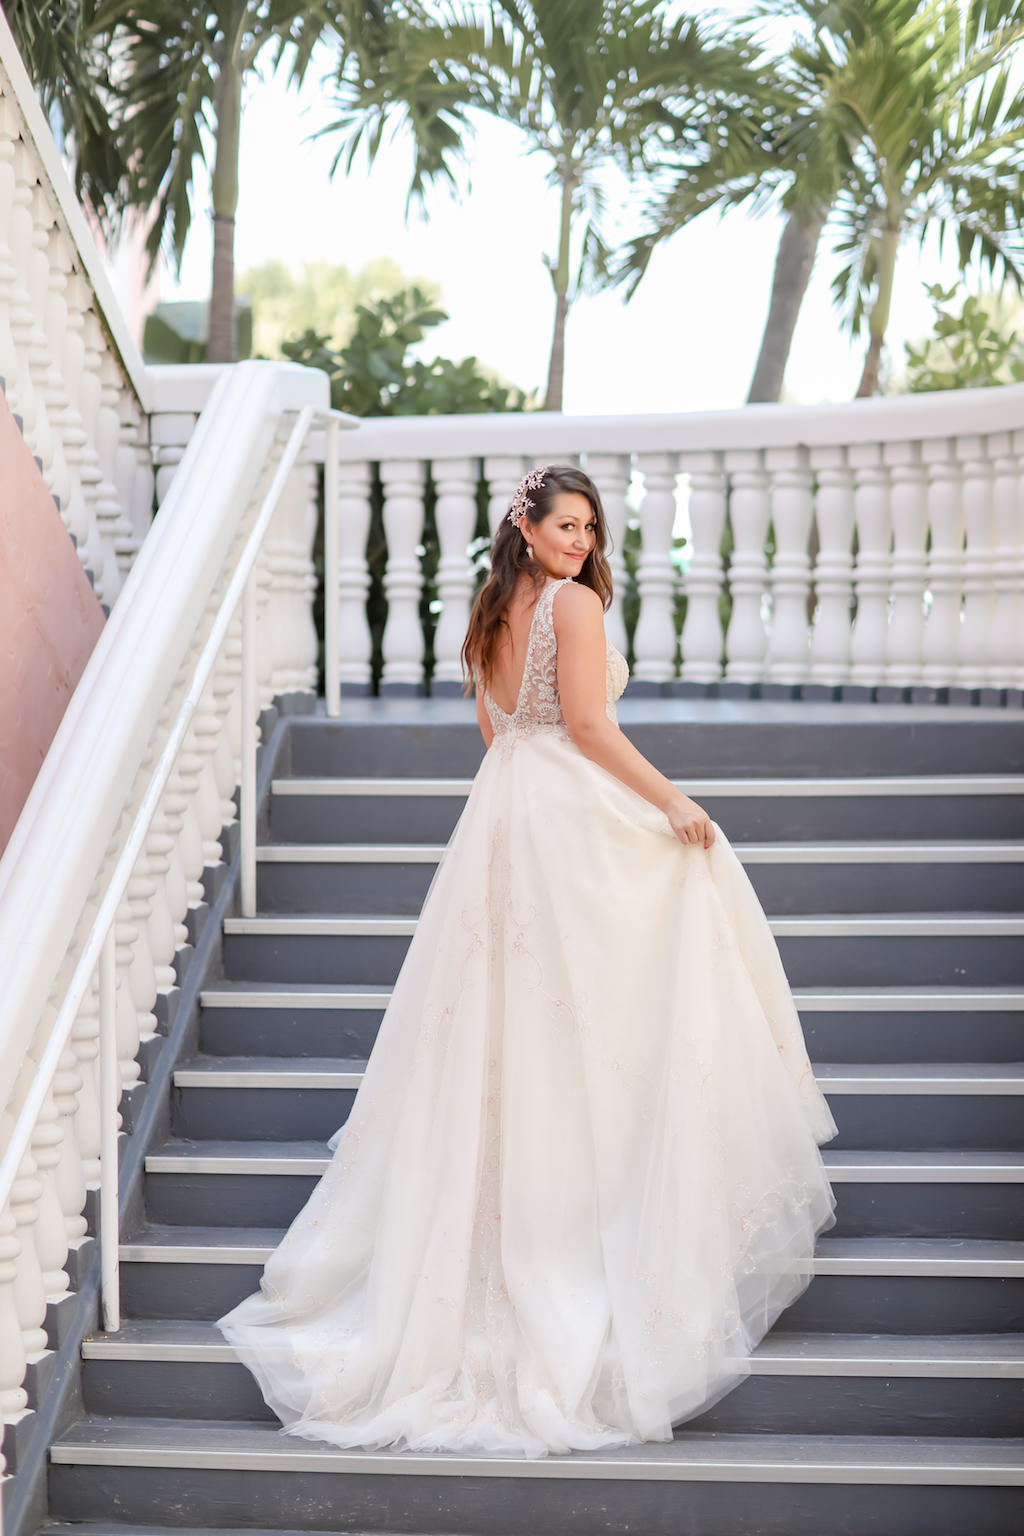 Bride Portrait on Stairs in Lace and Illusion Tank Top Strap and Low Back Wedding Dress | St. Petersburg Photographer Lifelong Photography Studios | St. Petersburg Historic Wedding Venue The Don Cesar | Instagram